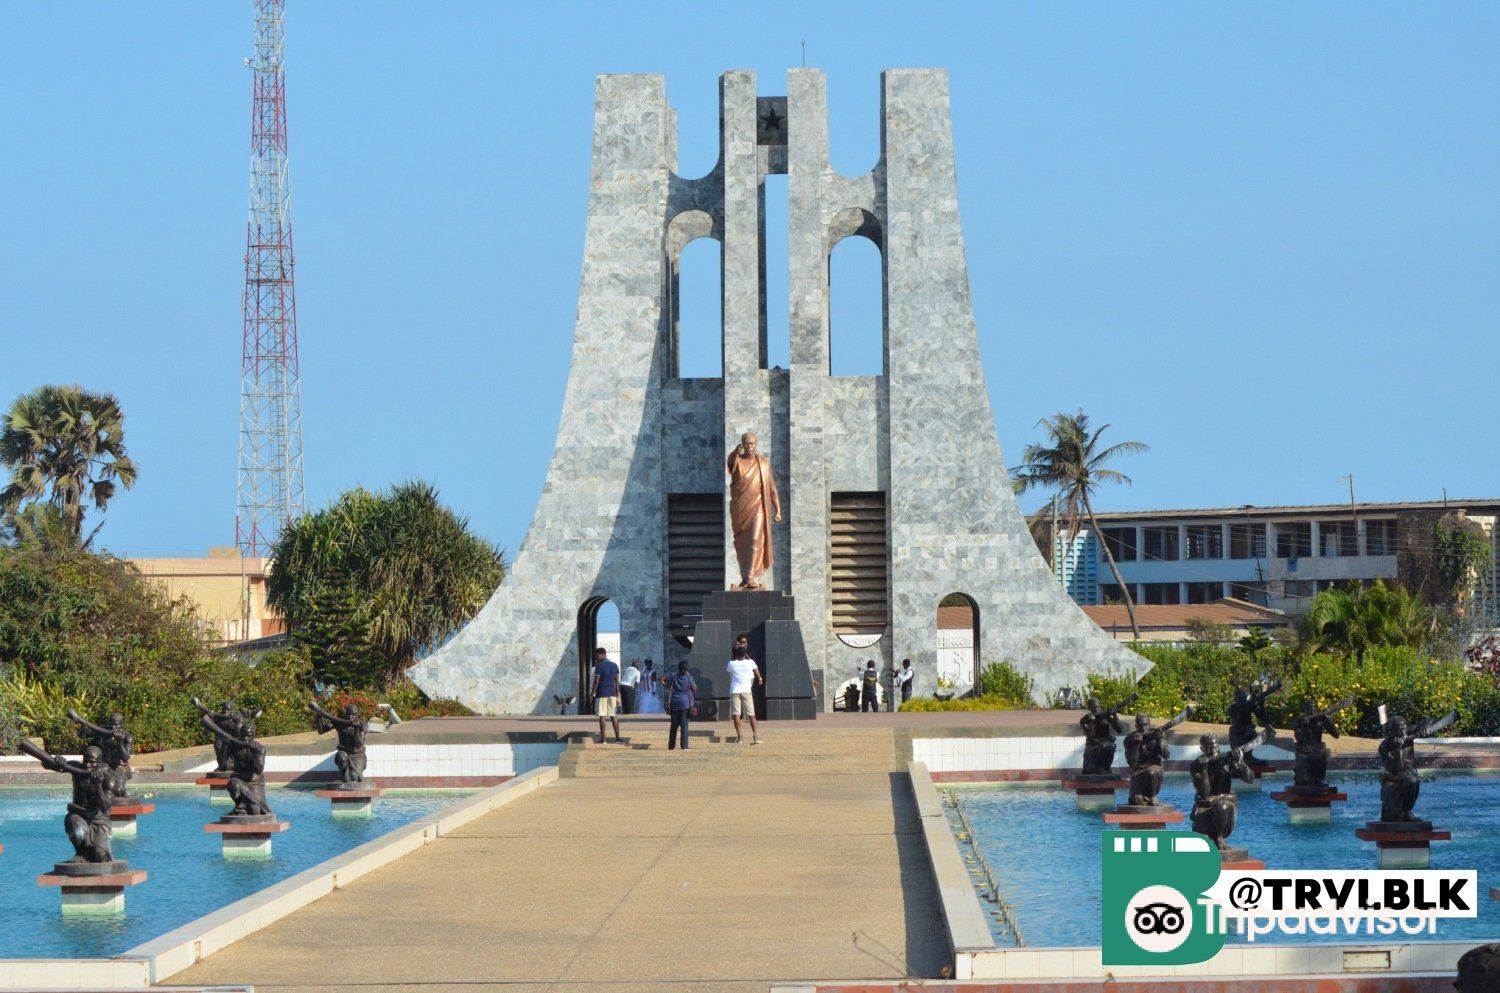 National Museum Of Ghana Attraction Reviews - National Museum Of Ghana  Tickets - National Museum Of Ghana Discounts - National Museum Of Ghana  Transportation, Address, Opening Hours - Attractions, Hotels, And Food